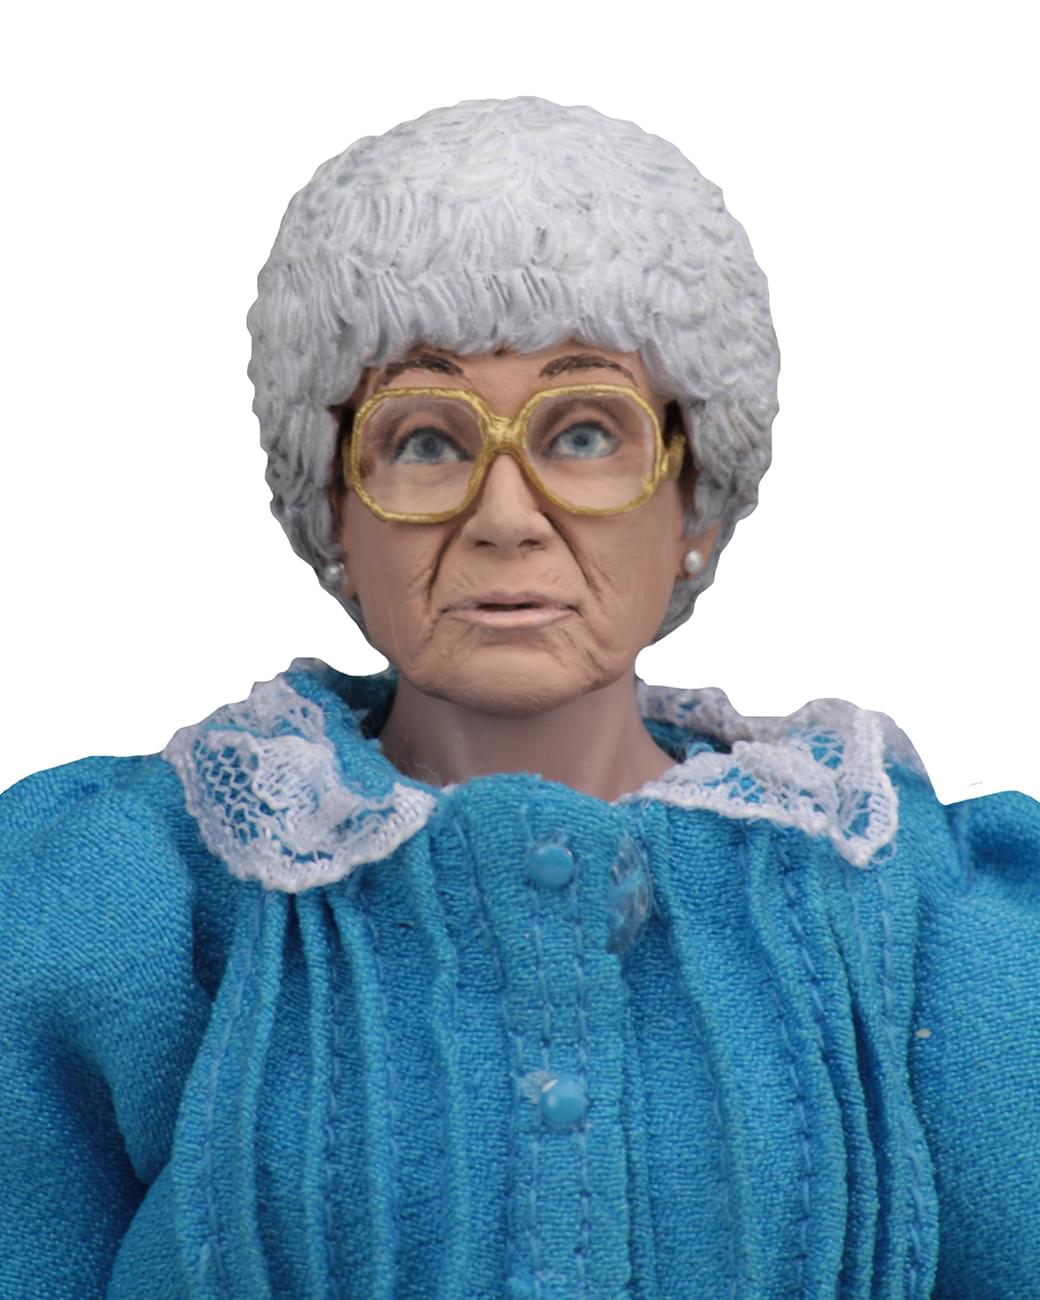 The Golden Girls 8 Inch Retro Clothed Figure - Sophia